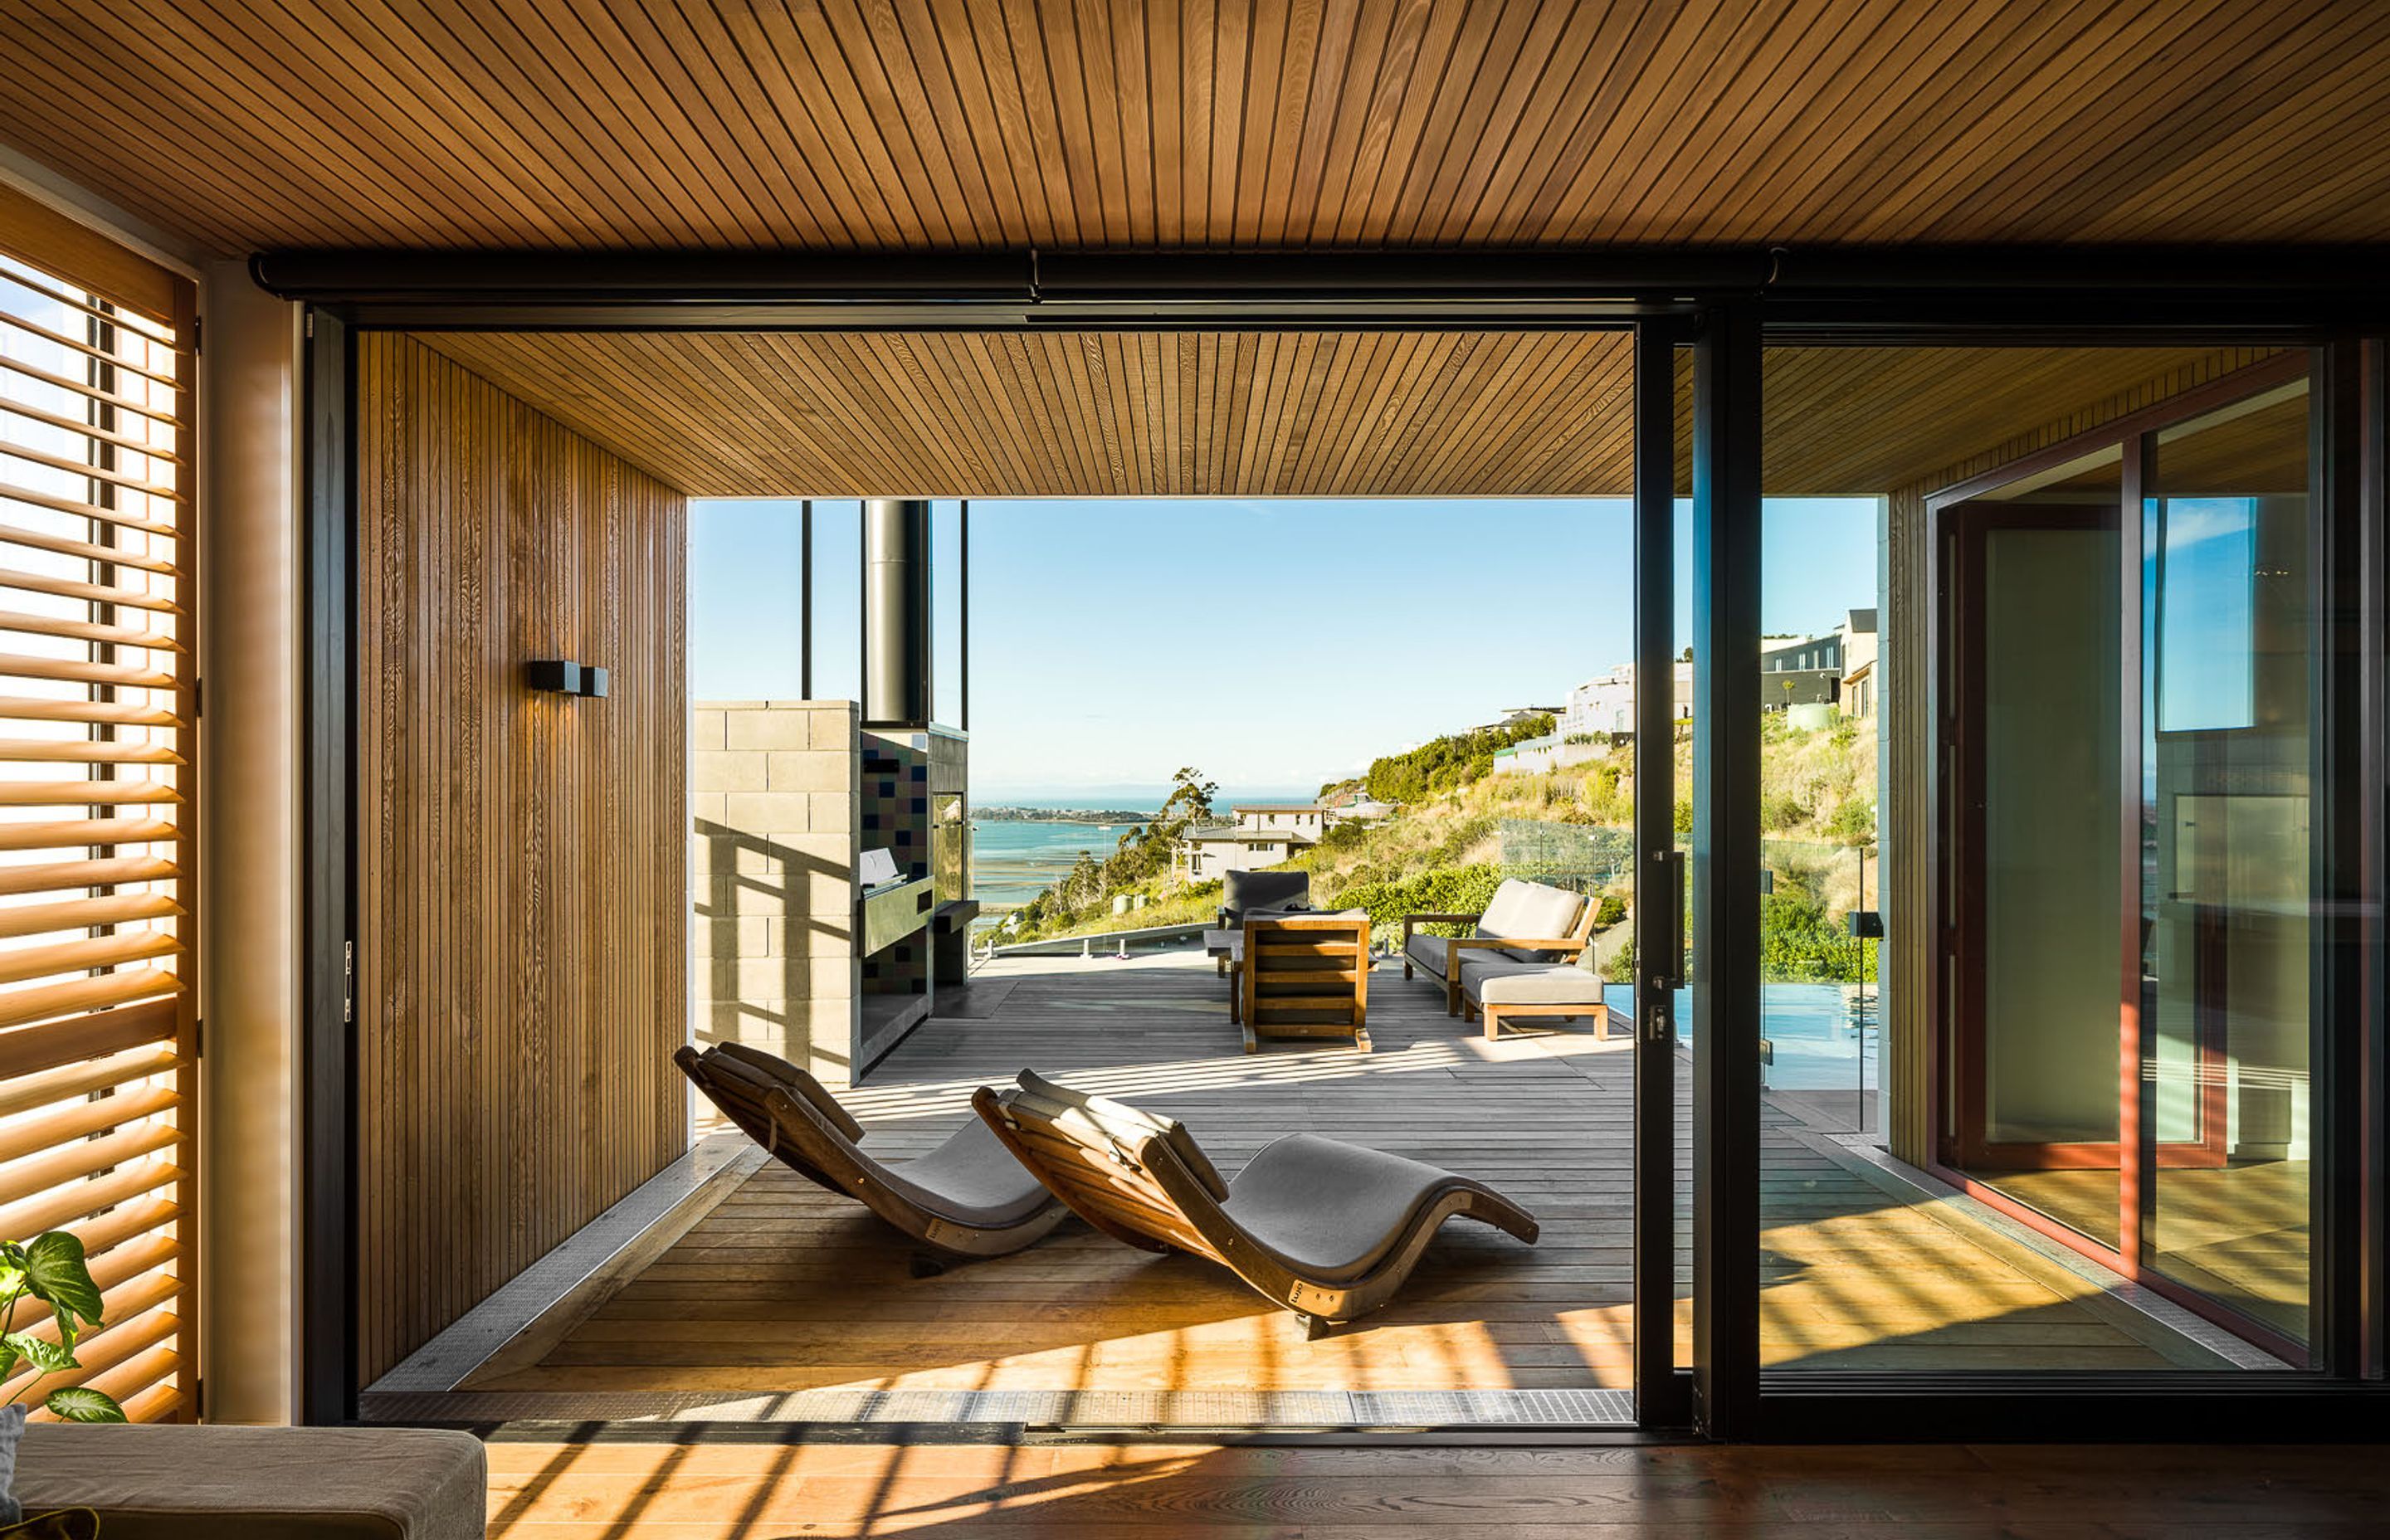 The living areas and outdoor spaces have been recessed into the building line to mitigate solar gain. The deep overhangs also help to frame the view, creating vignettes from every room.